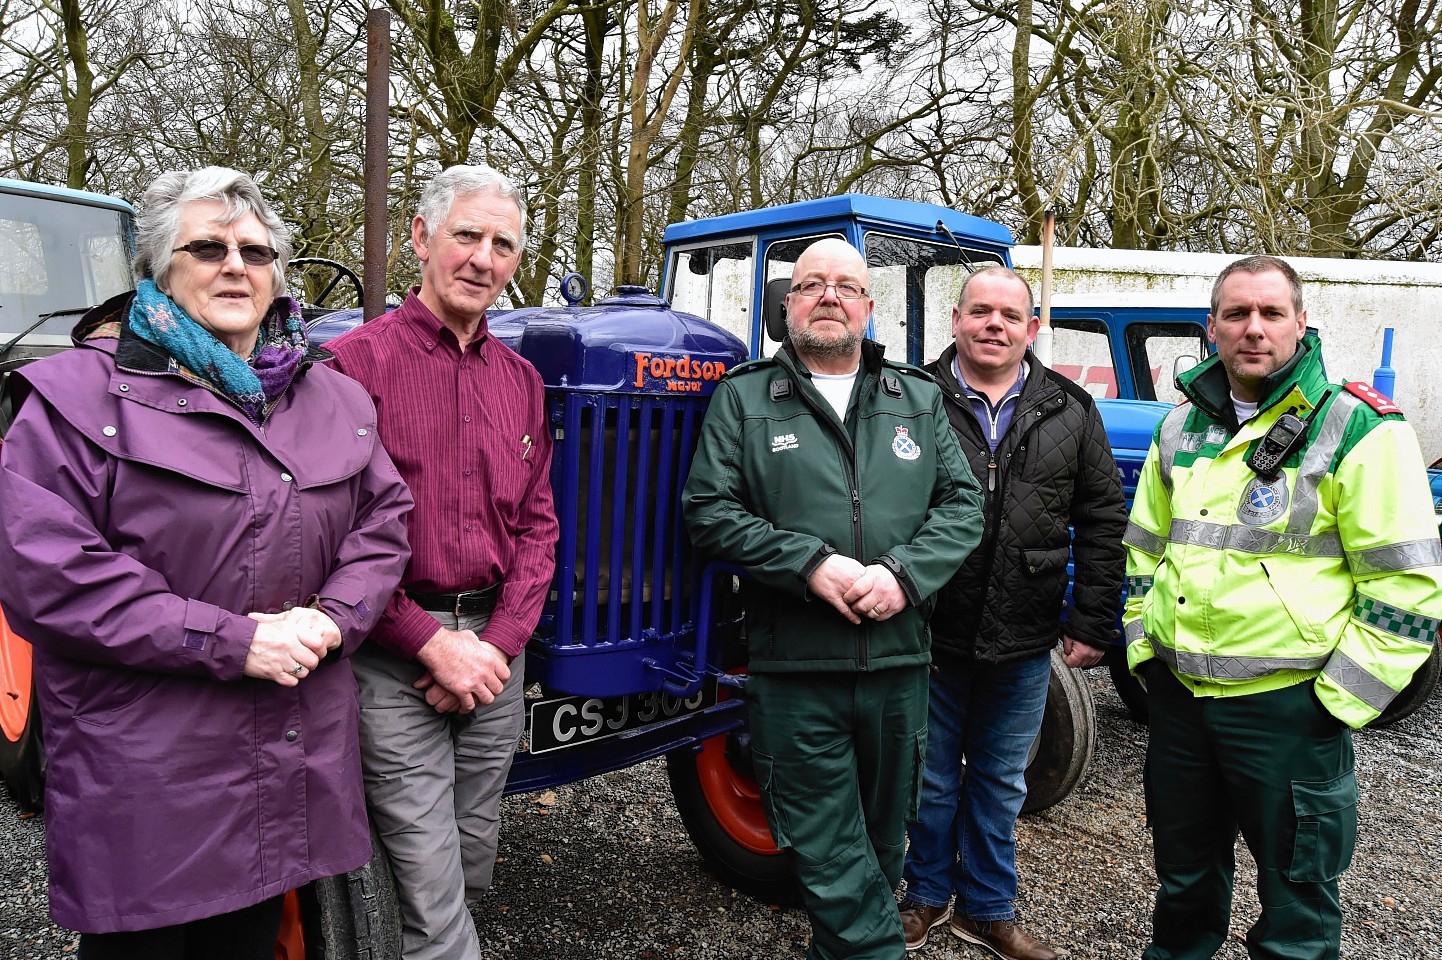 (L TO R) ORGANISERS JANE AND BILL IRONSIDE, JAMES HENDRY, FRASERBURGH AMBULANCE STATION MANAGER, ALAN THAIN AND STEVE MUNRO, AIR AMBULANCE AREA SERVICE MANAGER